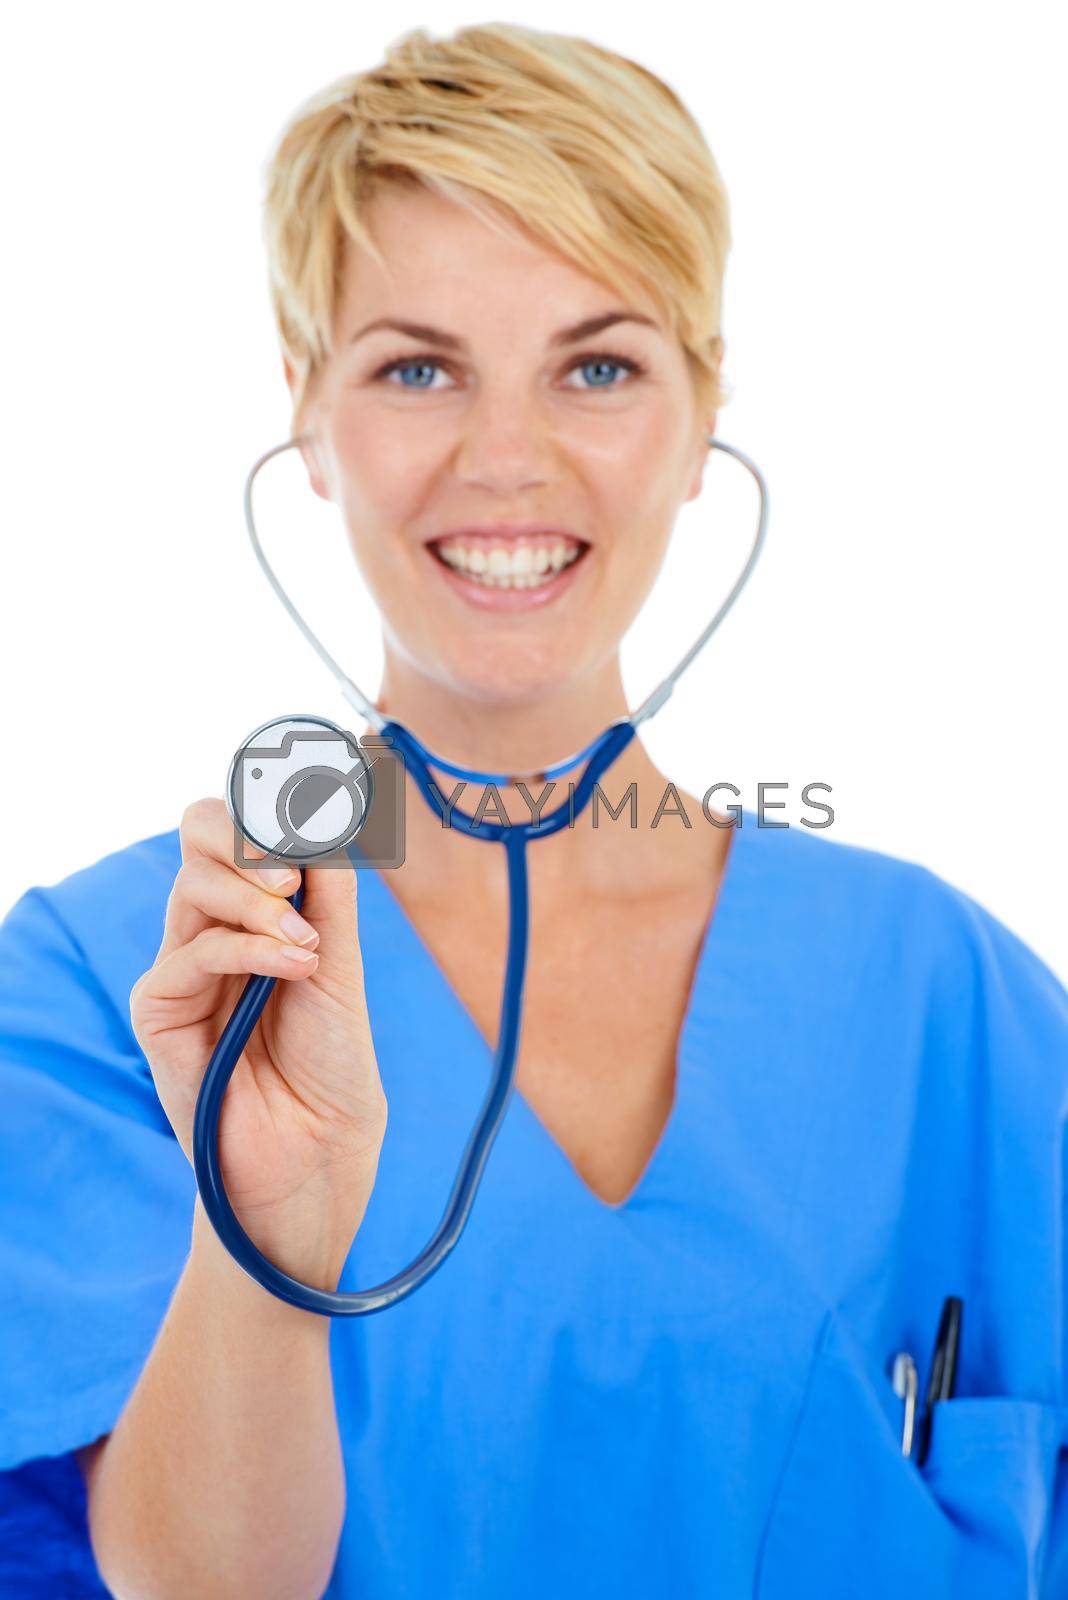 Royalty free image of Ready for a checkup. A young smiling doctor holding her stethoscope up to the camera. by YuriArcurs